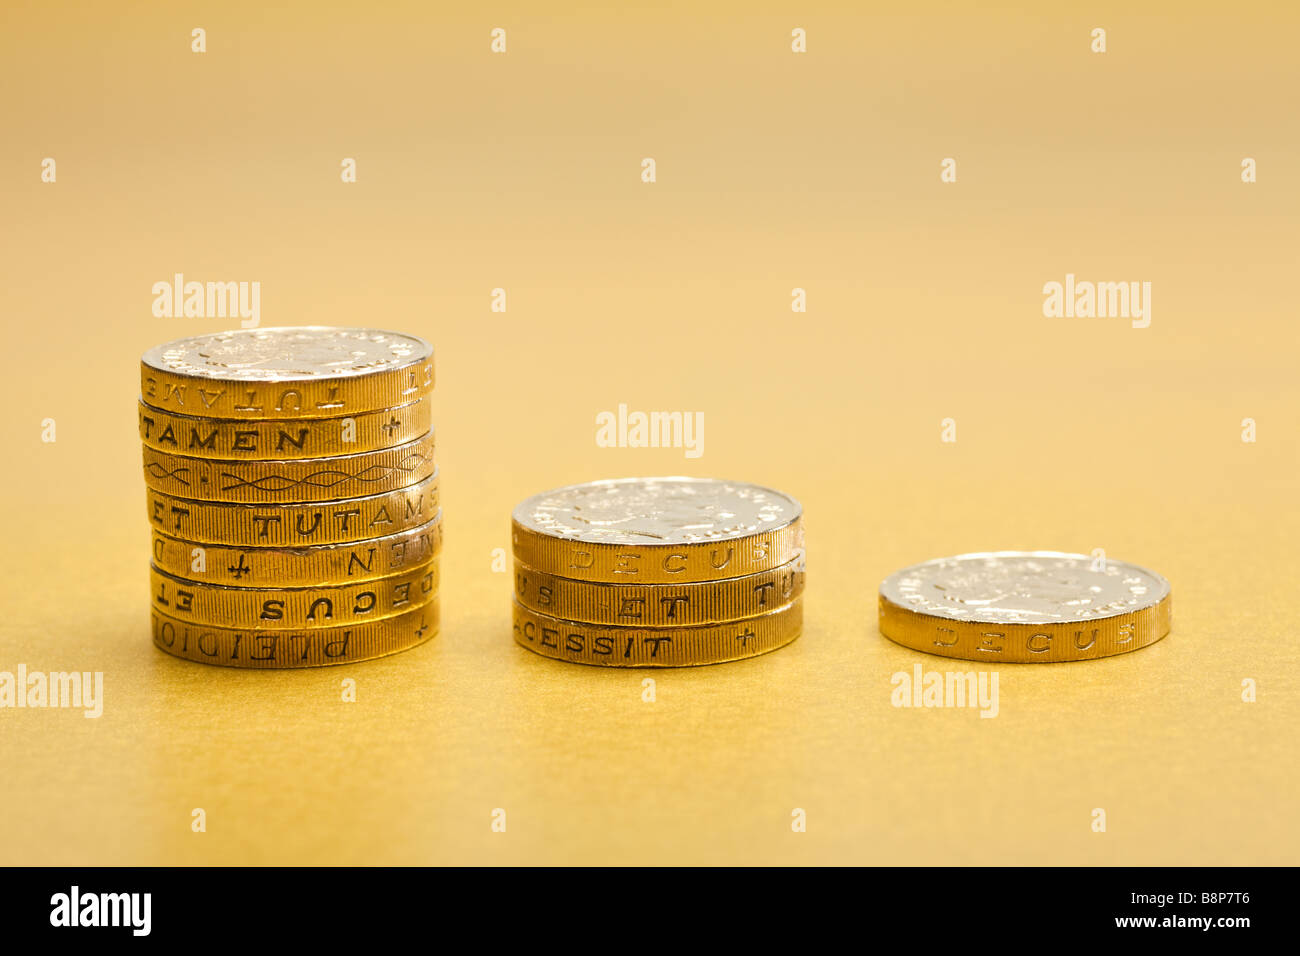 Decreasing stacks of £1 one pound coins sterling on gold background Stock Photo